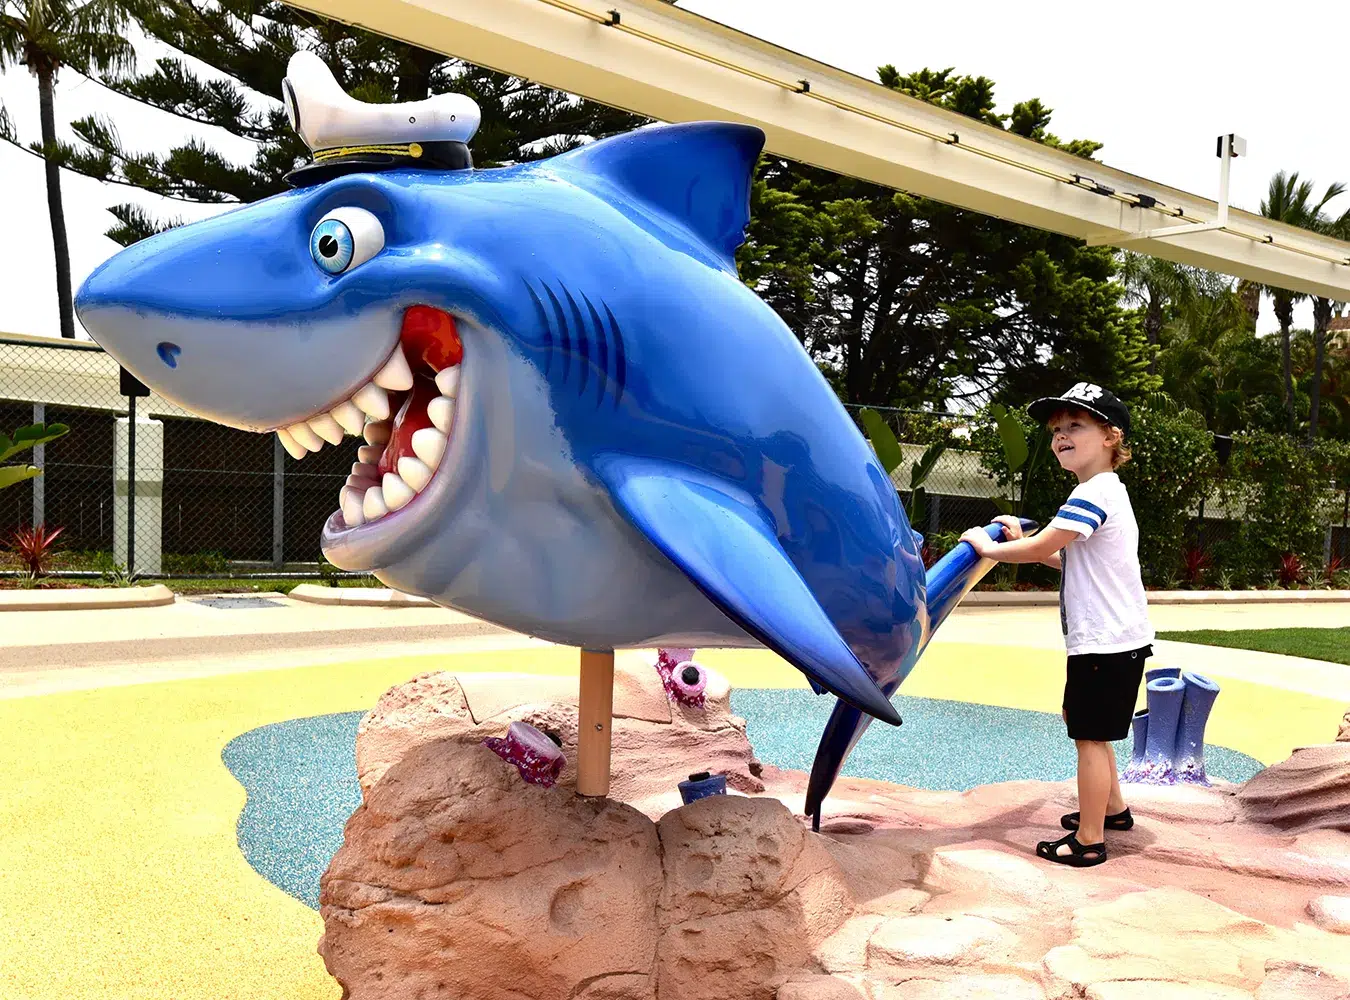 n outdoor play area with a child interacting with a large, playful blue shark sculpture adorned with a captain's hat; tall palm trees provide a backdrop.